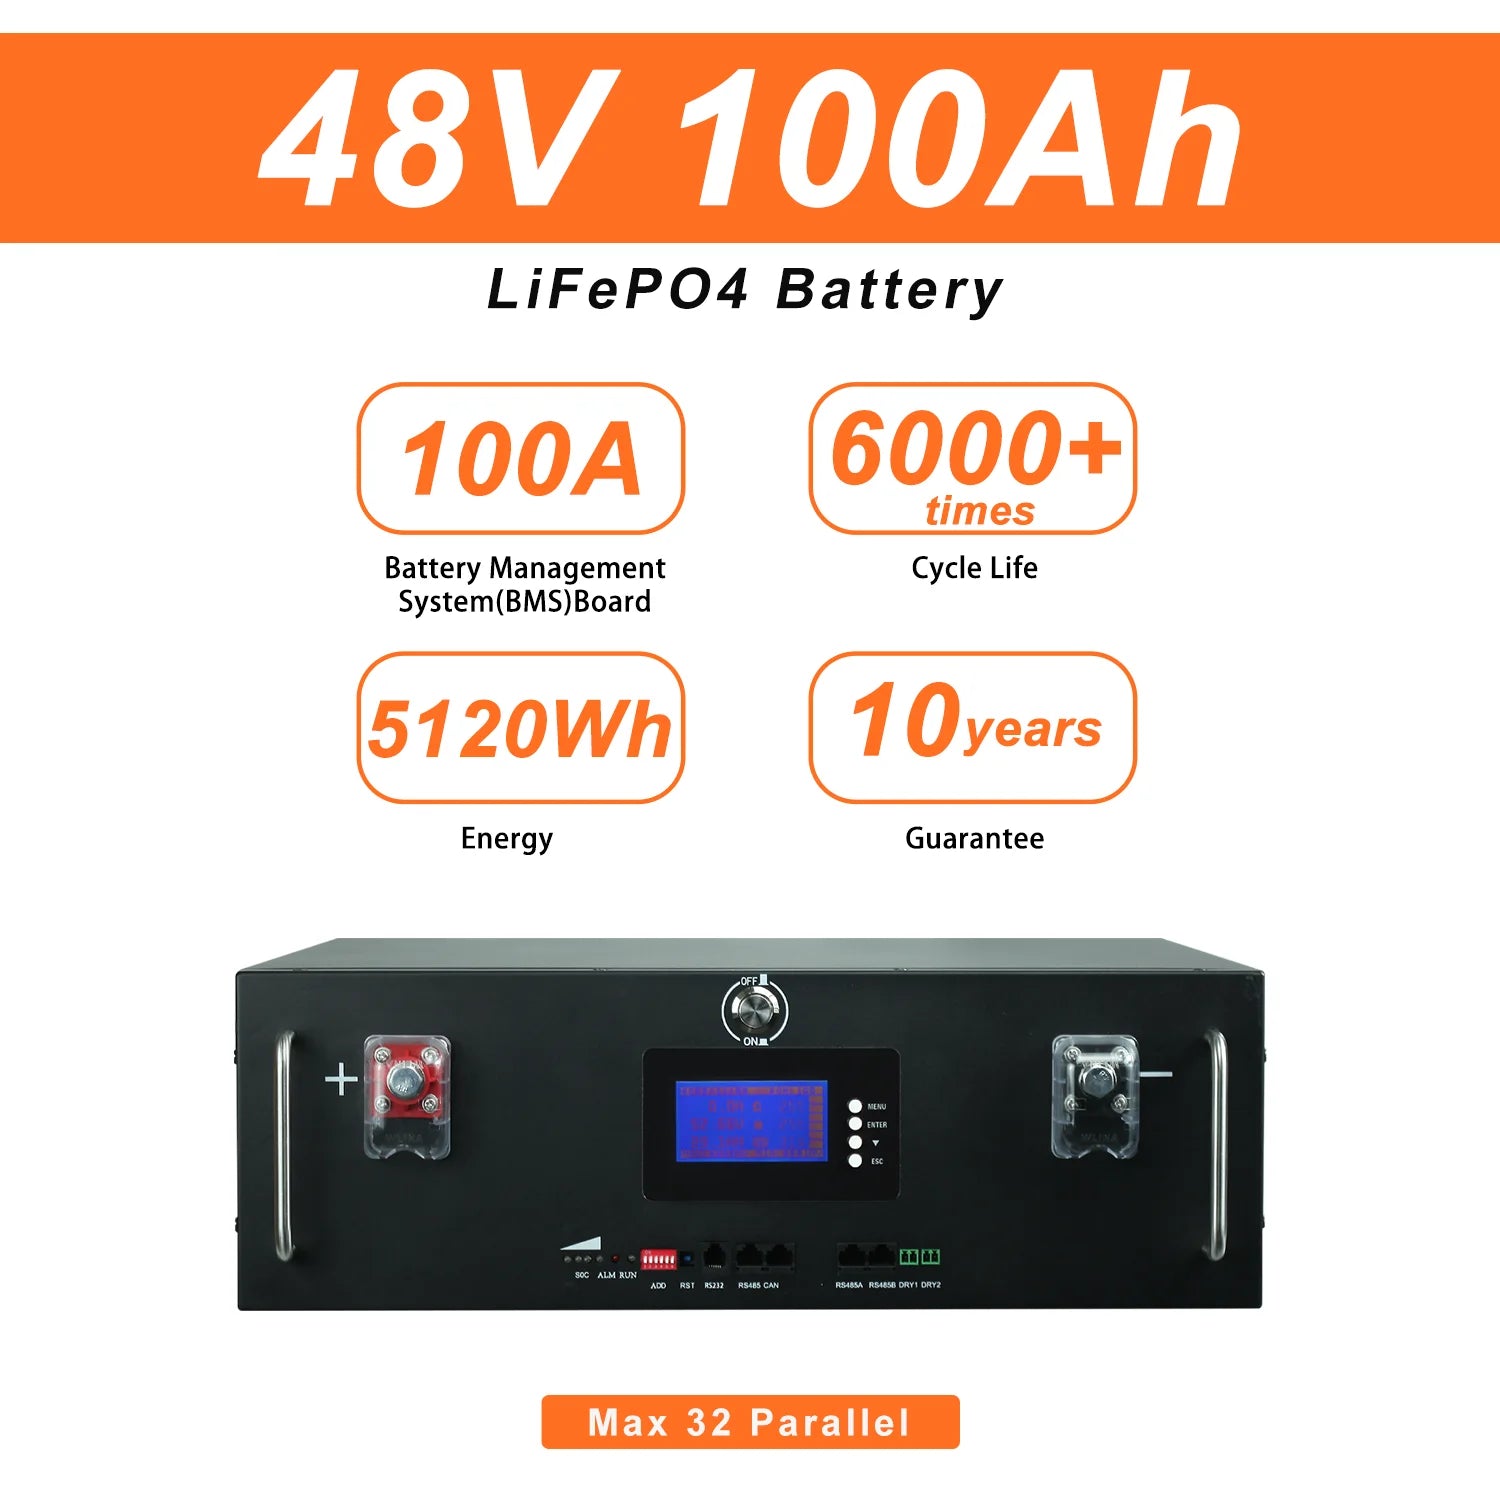 New 48V 100Ah LiFePo4 Battery, High-capacity 48V LiFePO4 battery pack with built-in BMS and 5-year warranty.